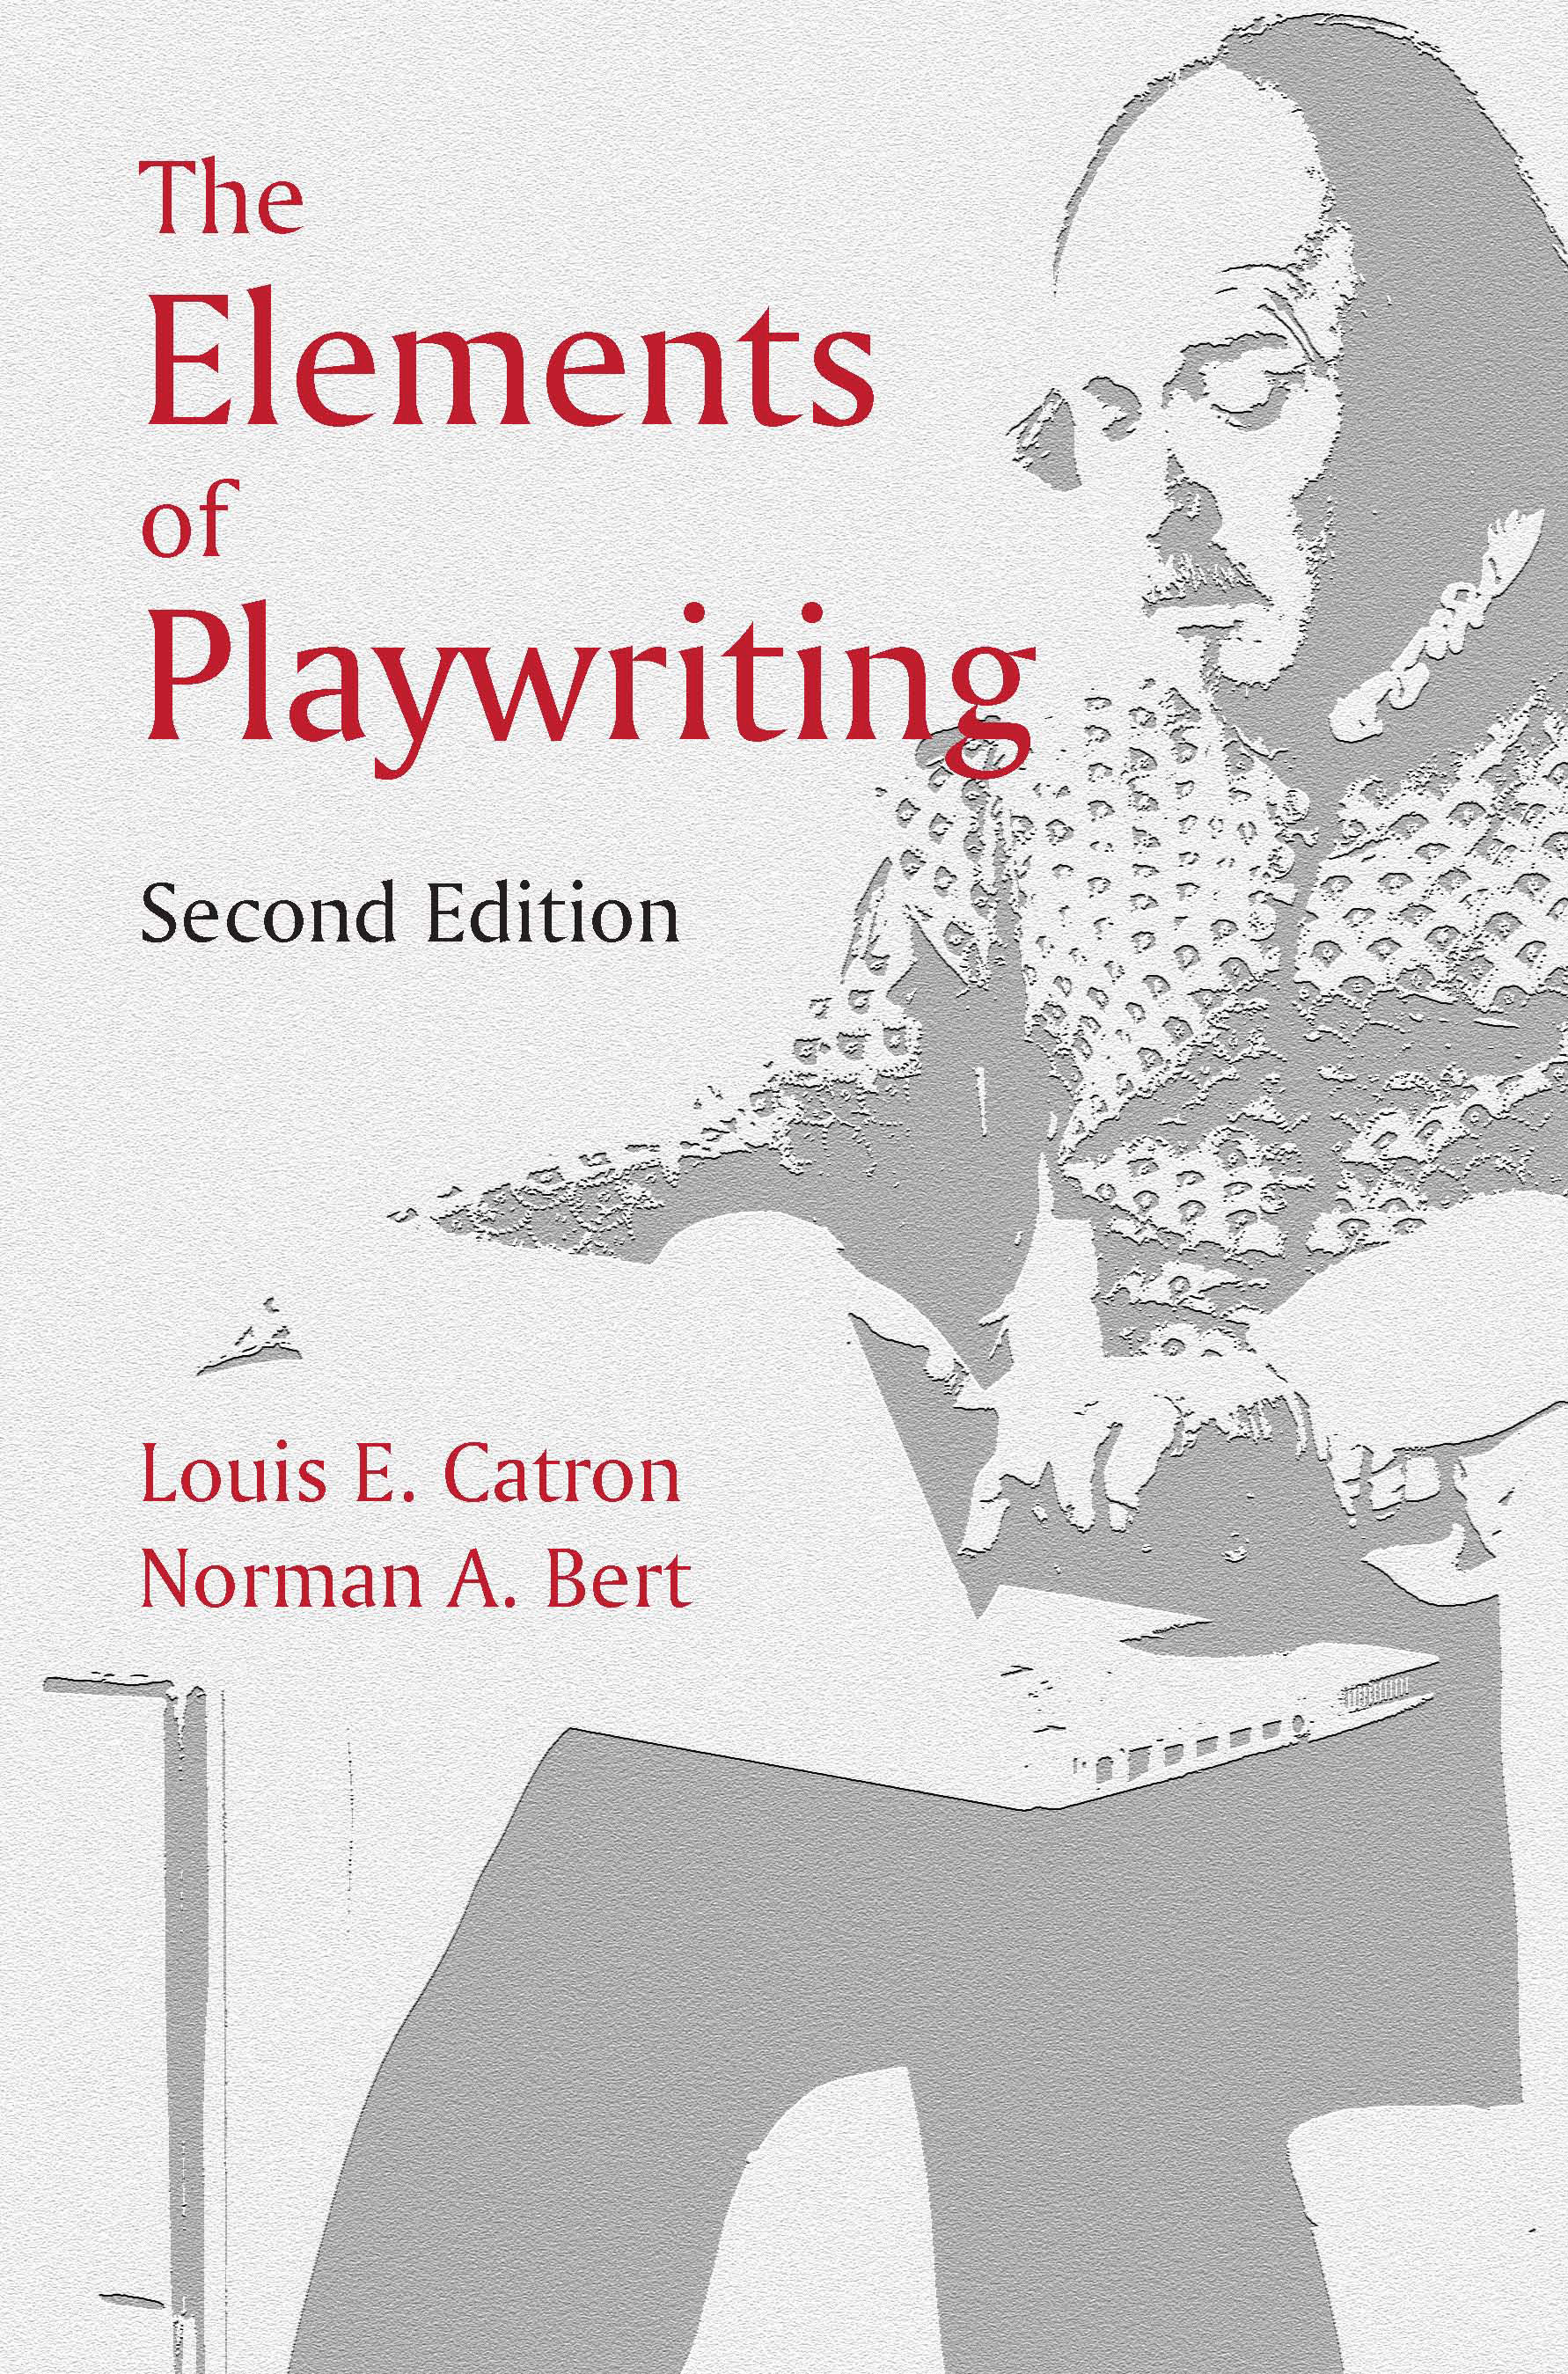 The Elements of Playwriting: Second Edition by Louis E. Catron, Norman A. Bert